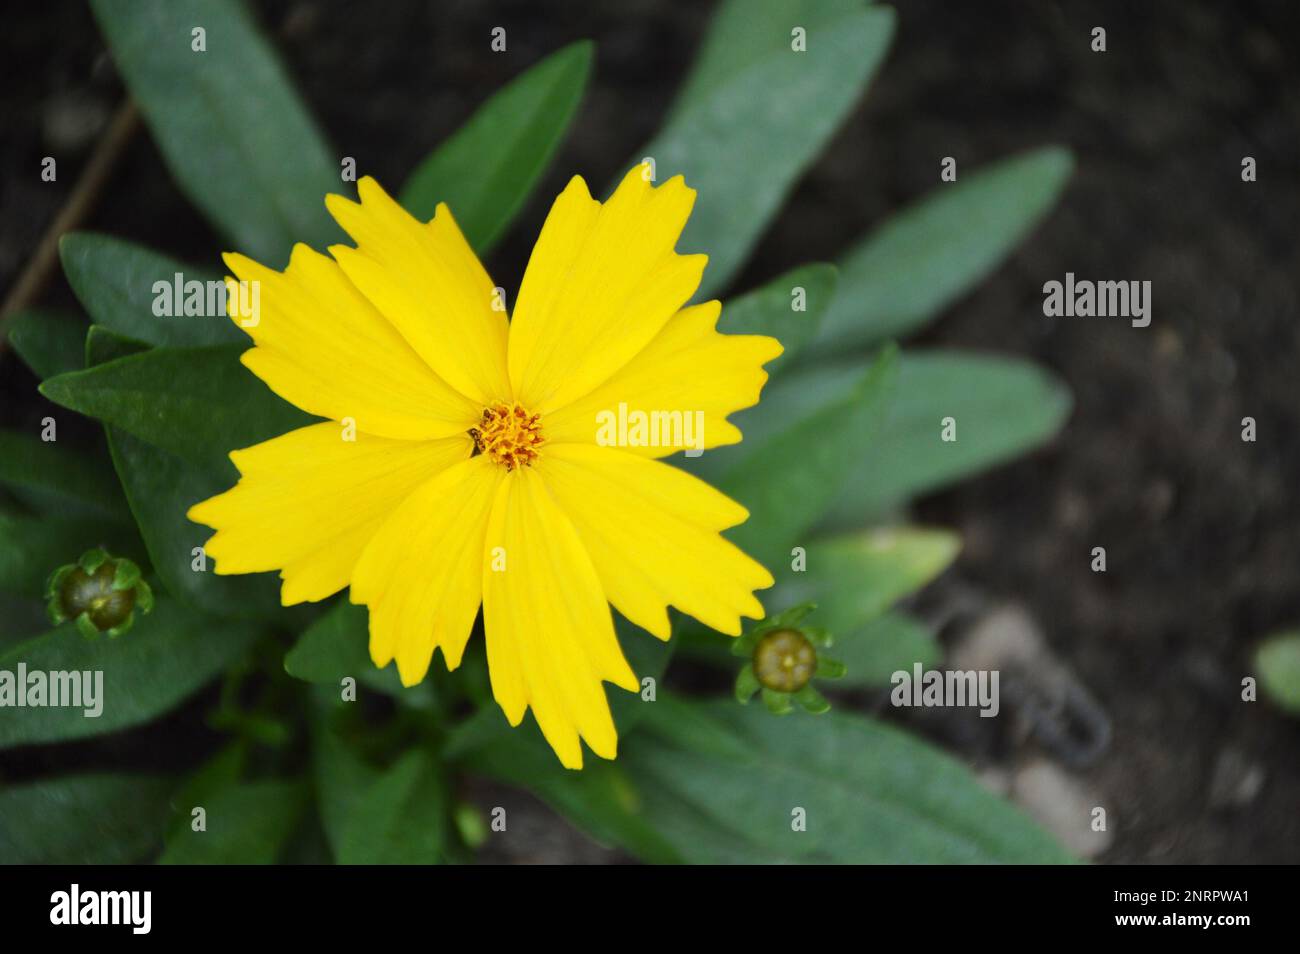 Coreopsis grandiflora flower plant growing in the garden, top view Stock Photo